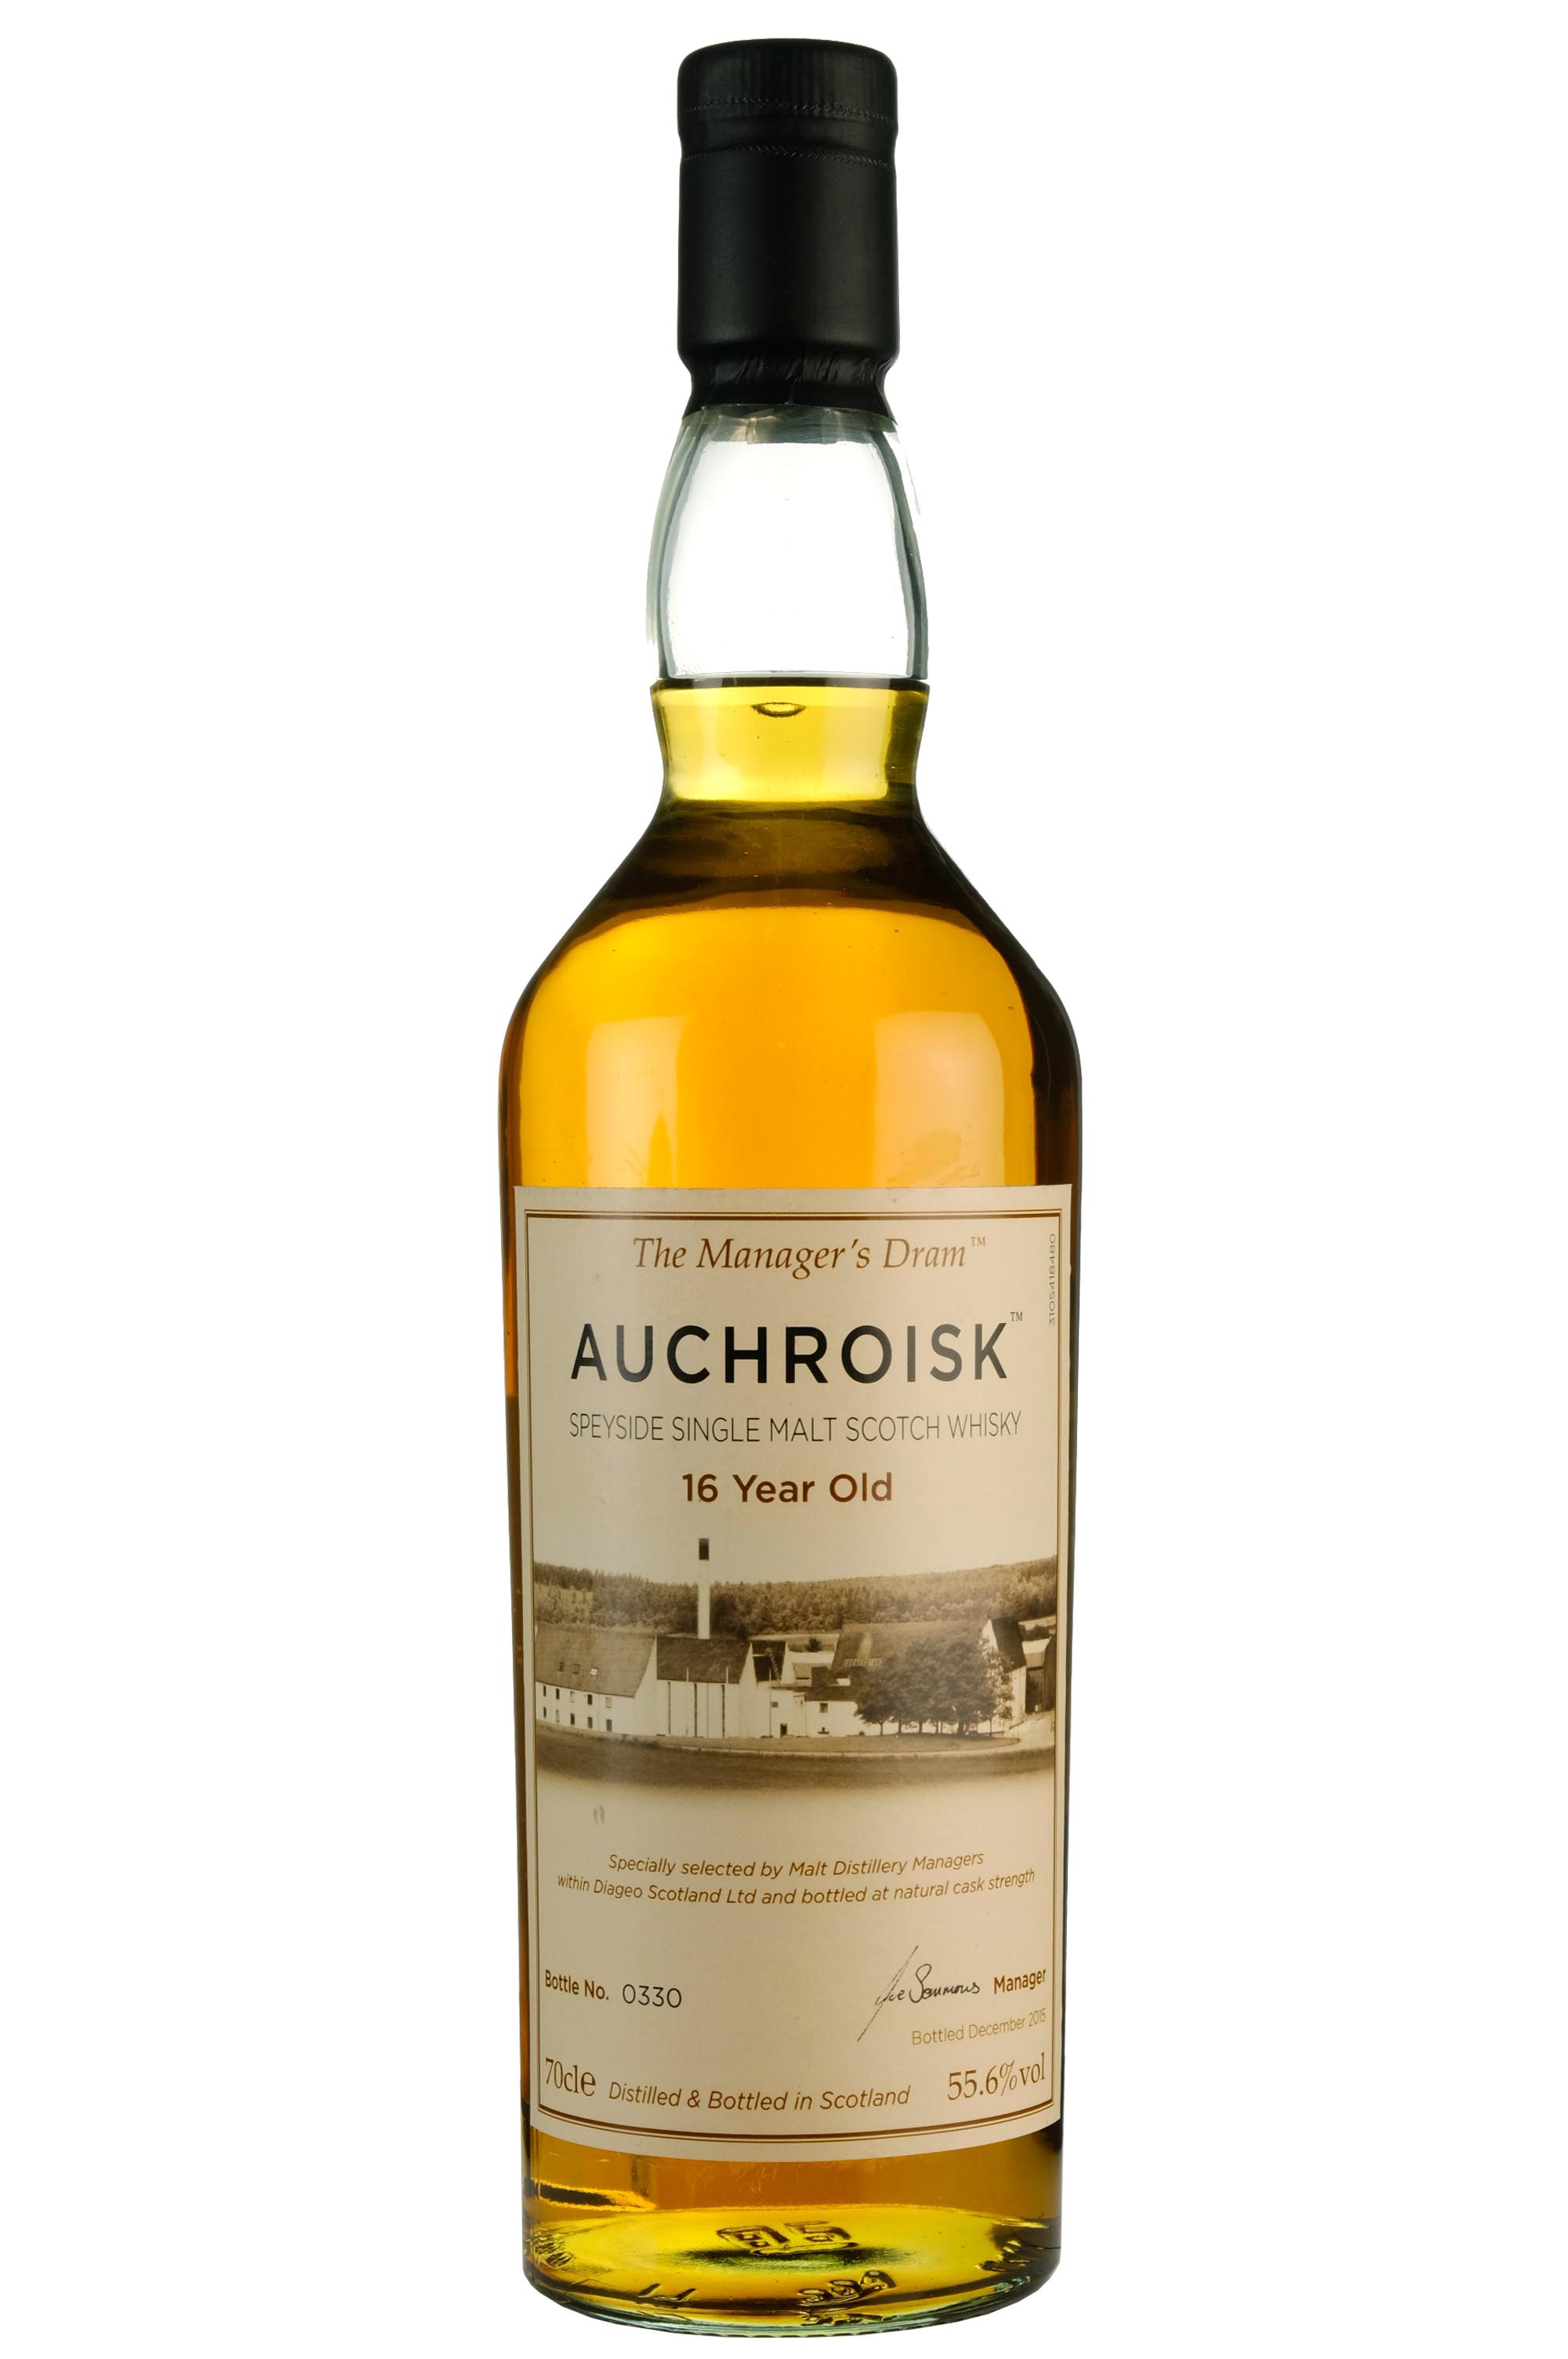 Auchroisk 16 Year Old The Manager's Dram | 2015 Release